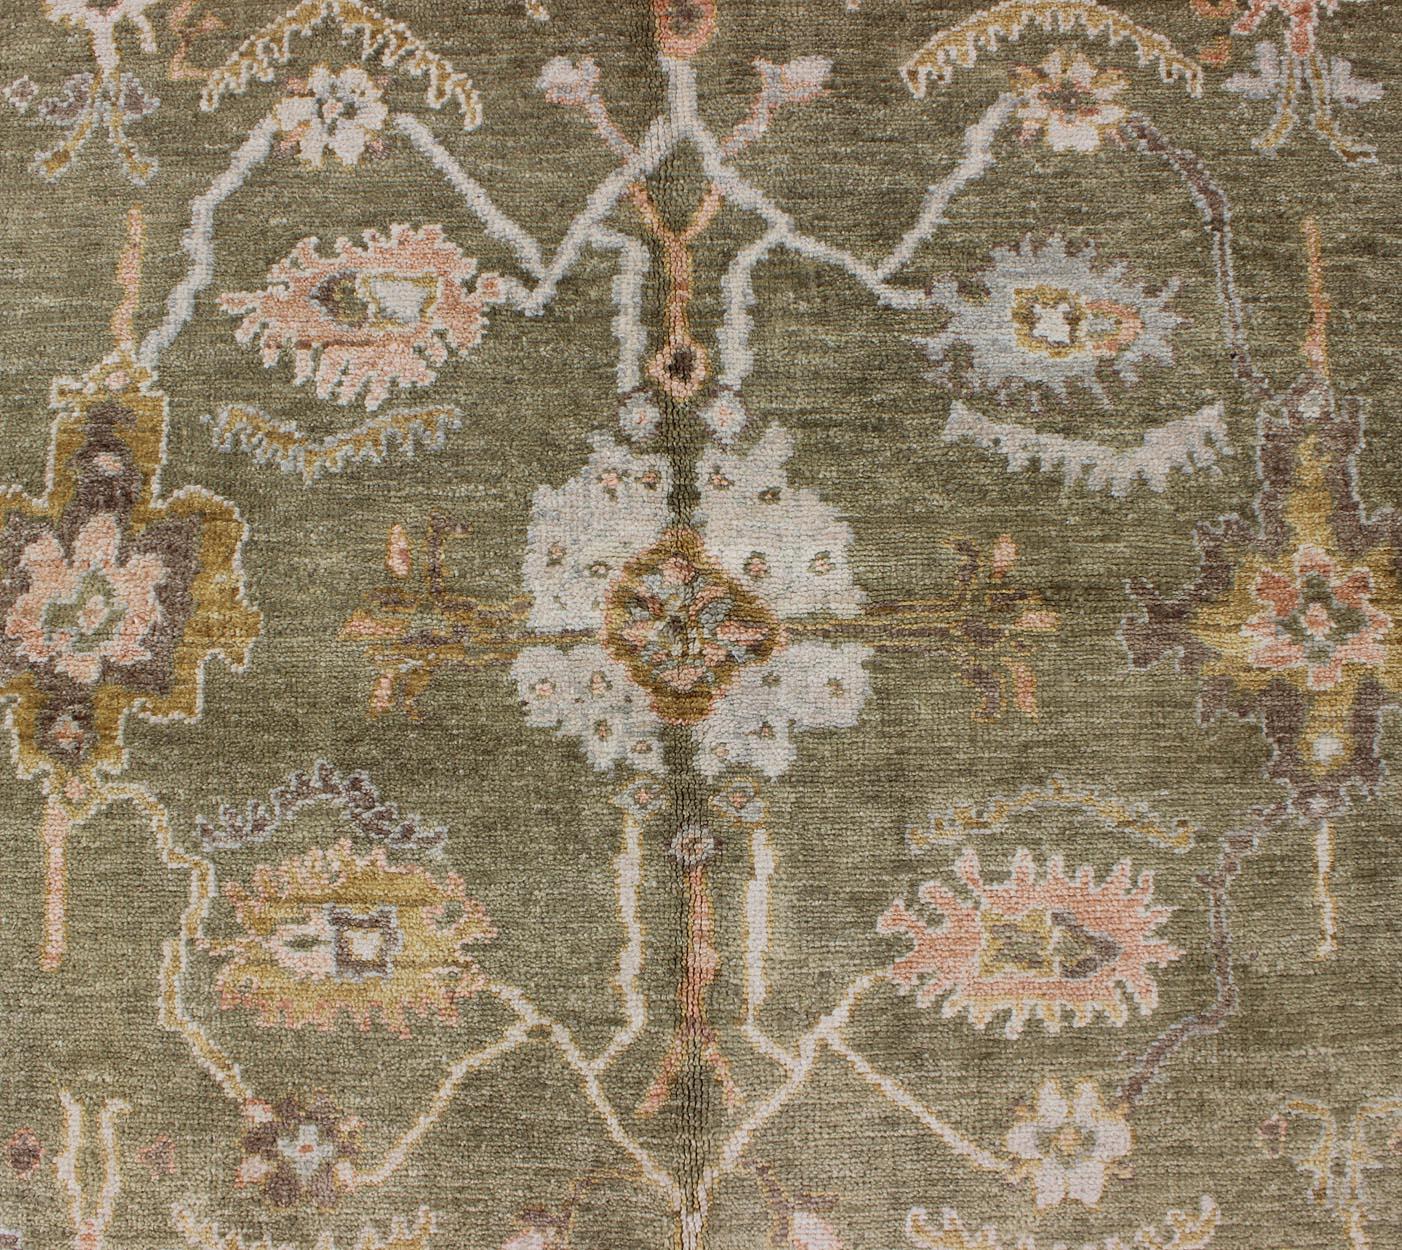 Reproduction Oushak rug with muted tones and neutral color palette and all-over floral design. Keivan Woven Arts / rug BDH-712862, country of origin / type: India/ Oushak

This New hand knotted Oushak rug features a beautiful design rendered in